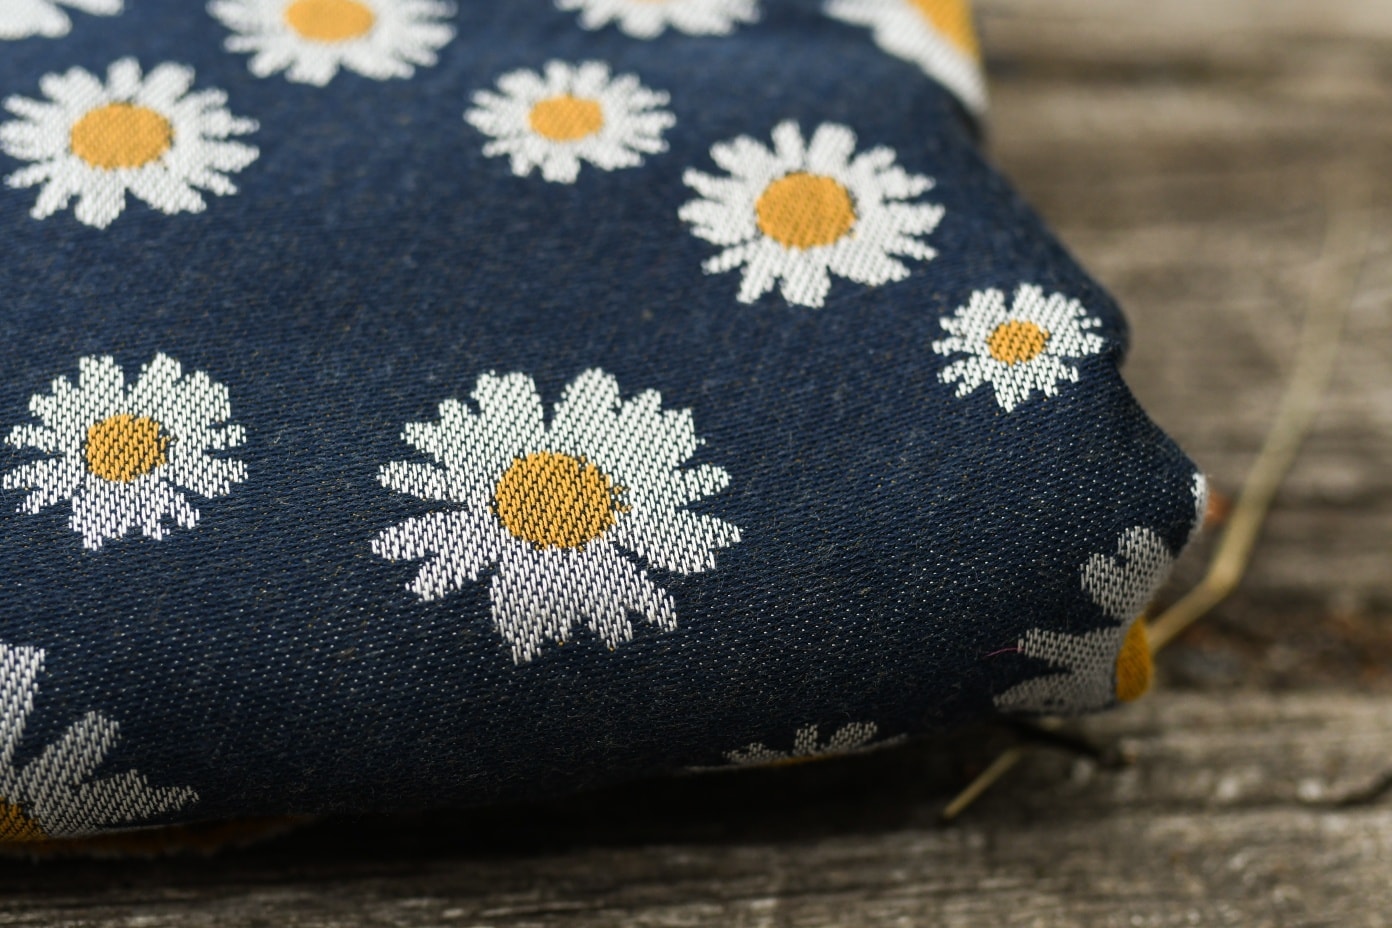 Woven Bliss Daisies Rustic  Wrap (bamboo) Image